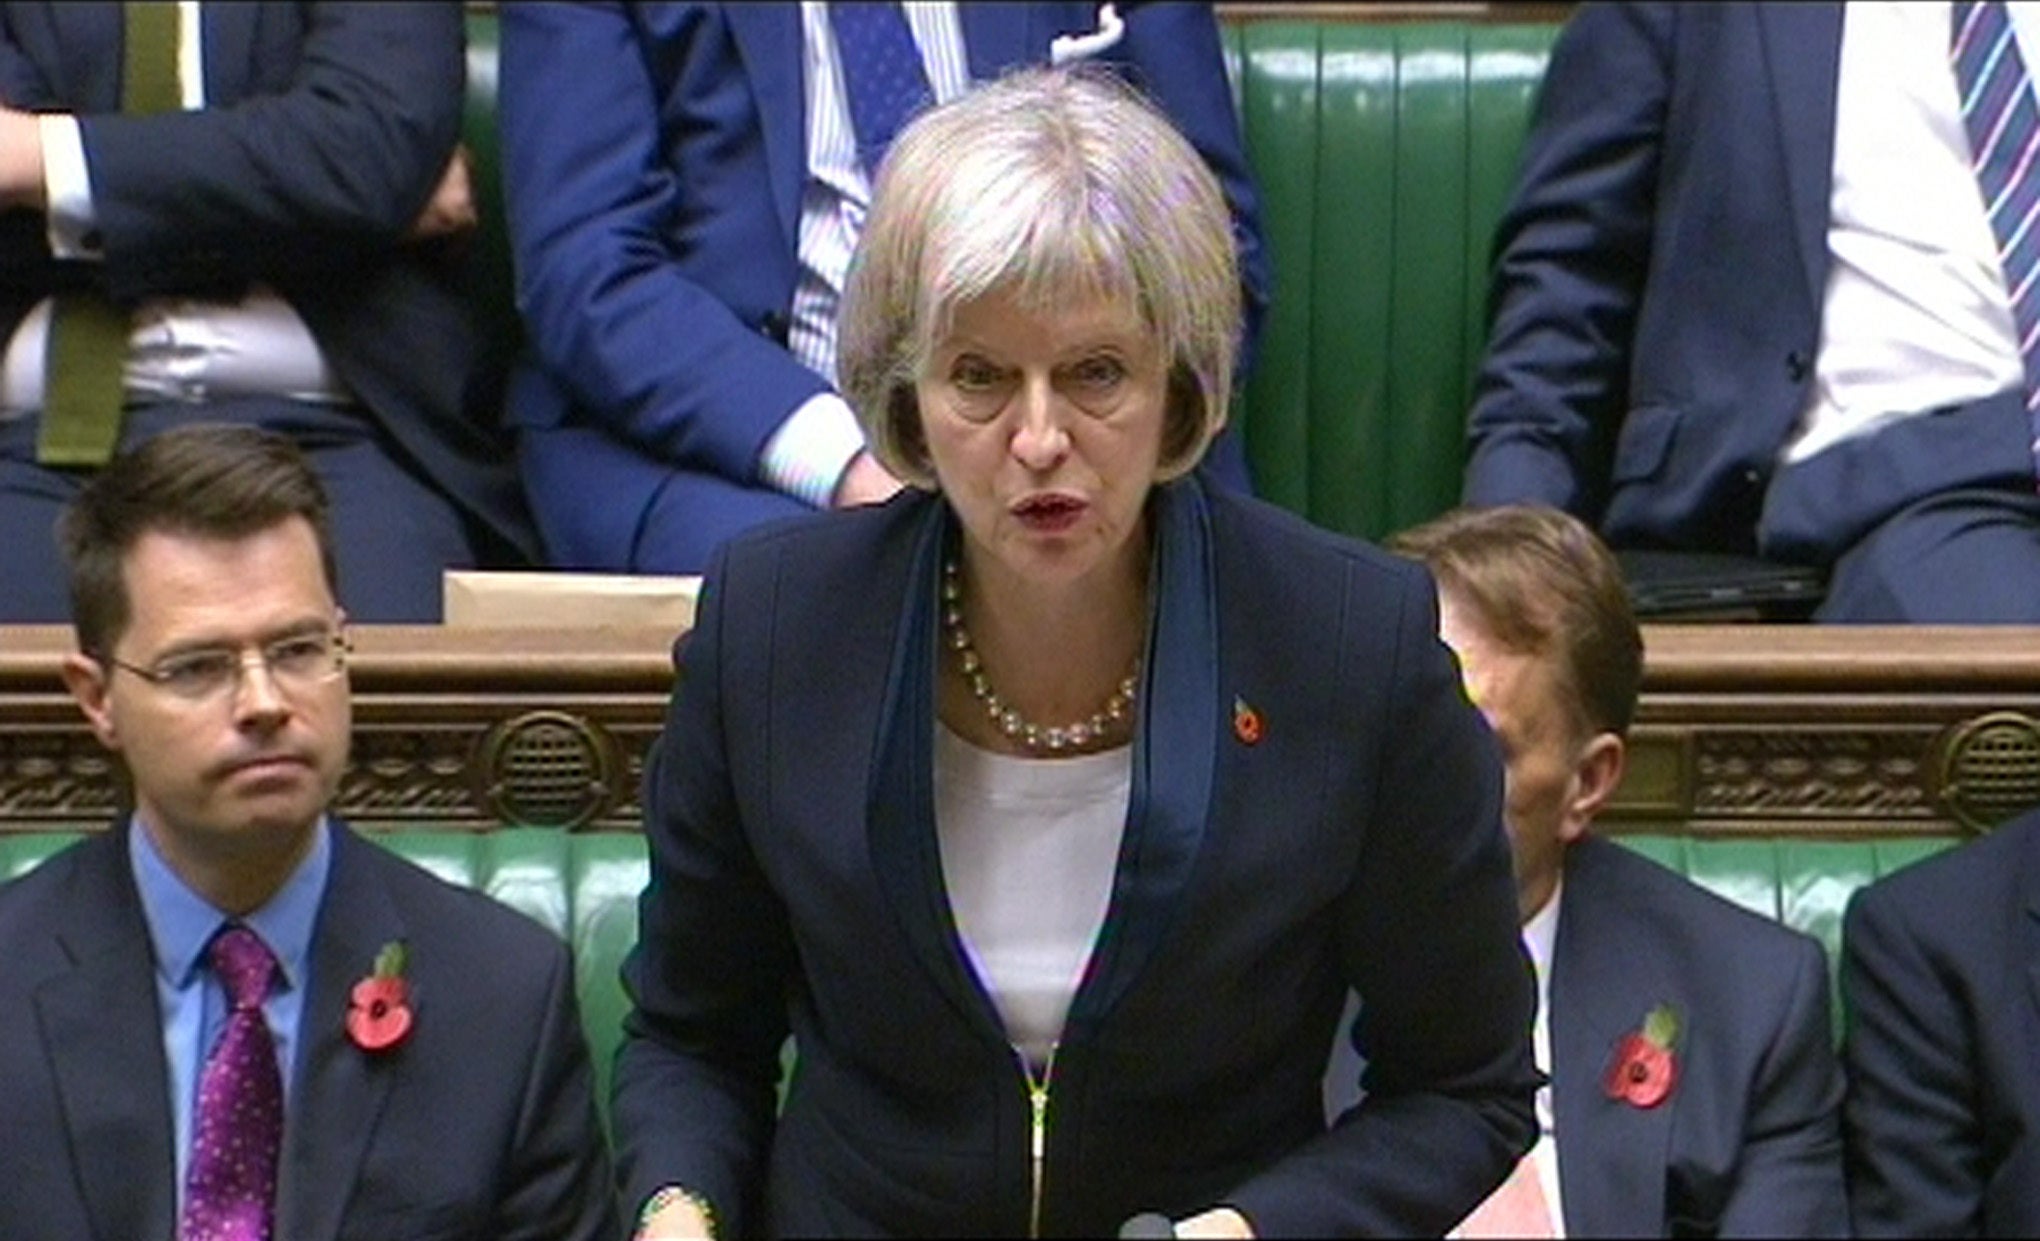 Theresa May sets out the draft Investigatory Powers Bill in the House of Commons